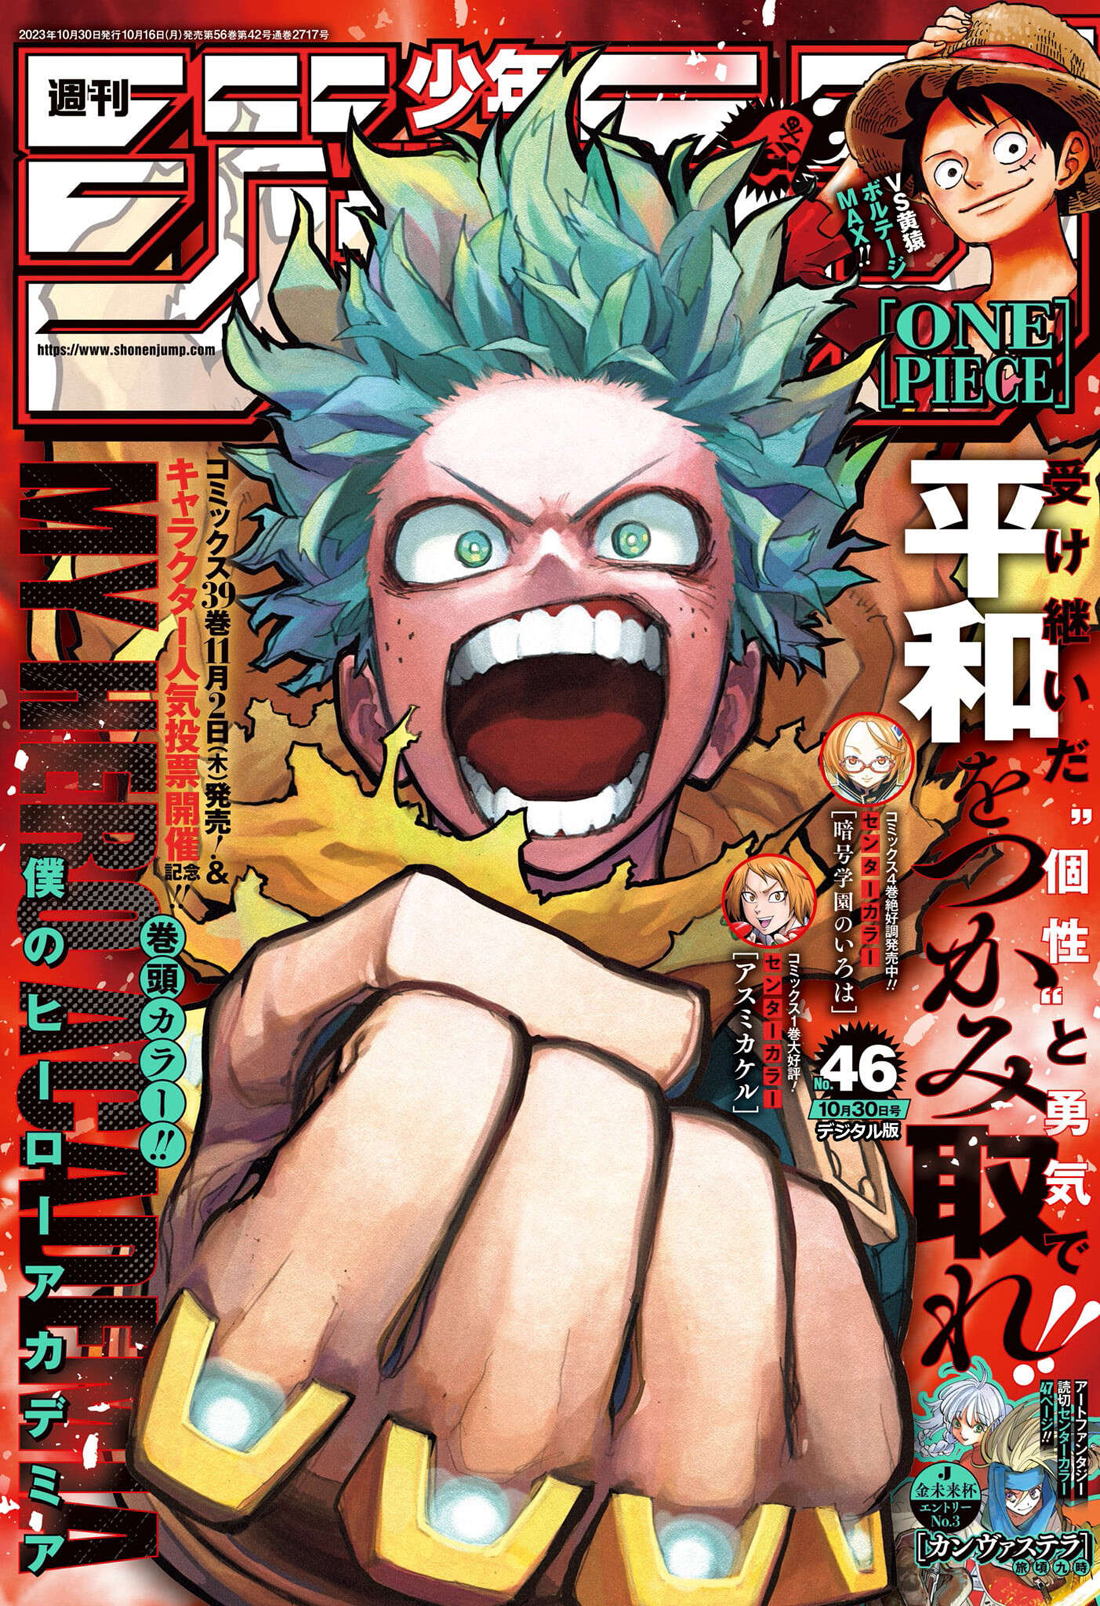 My Hero Academia, Chapter 403  TcbScans Org - Free Manga Online in High  Quality